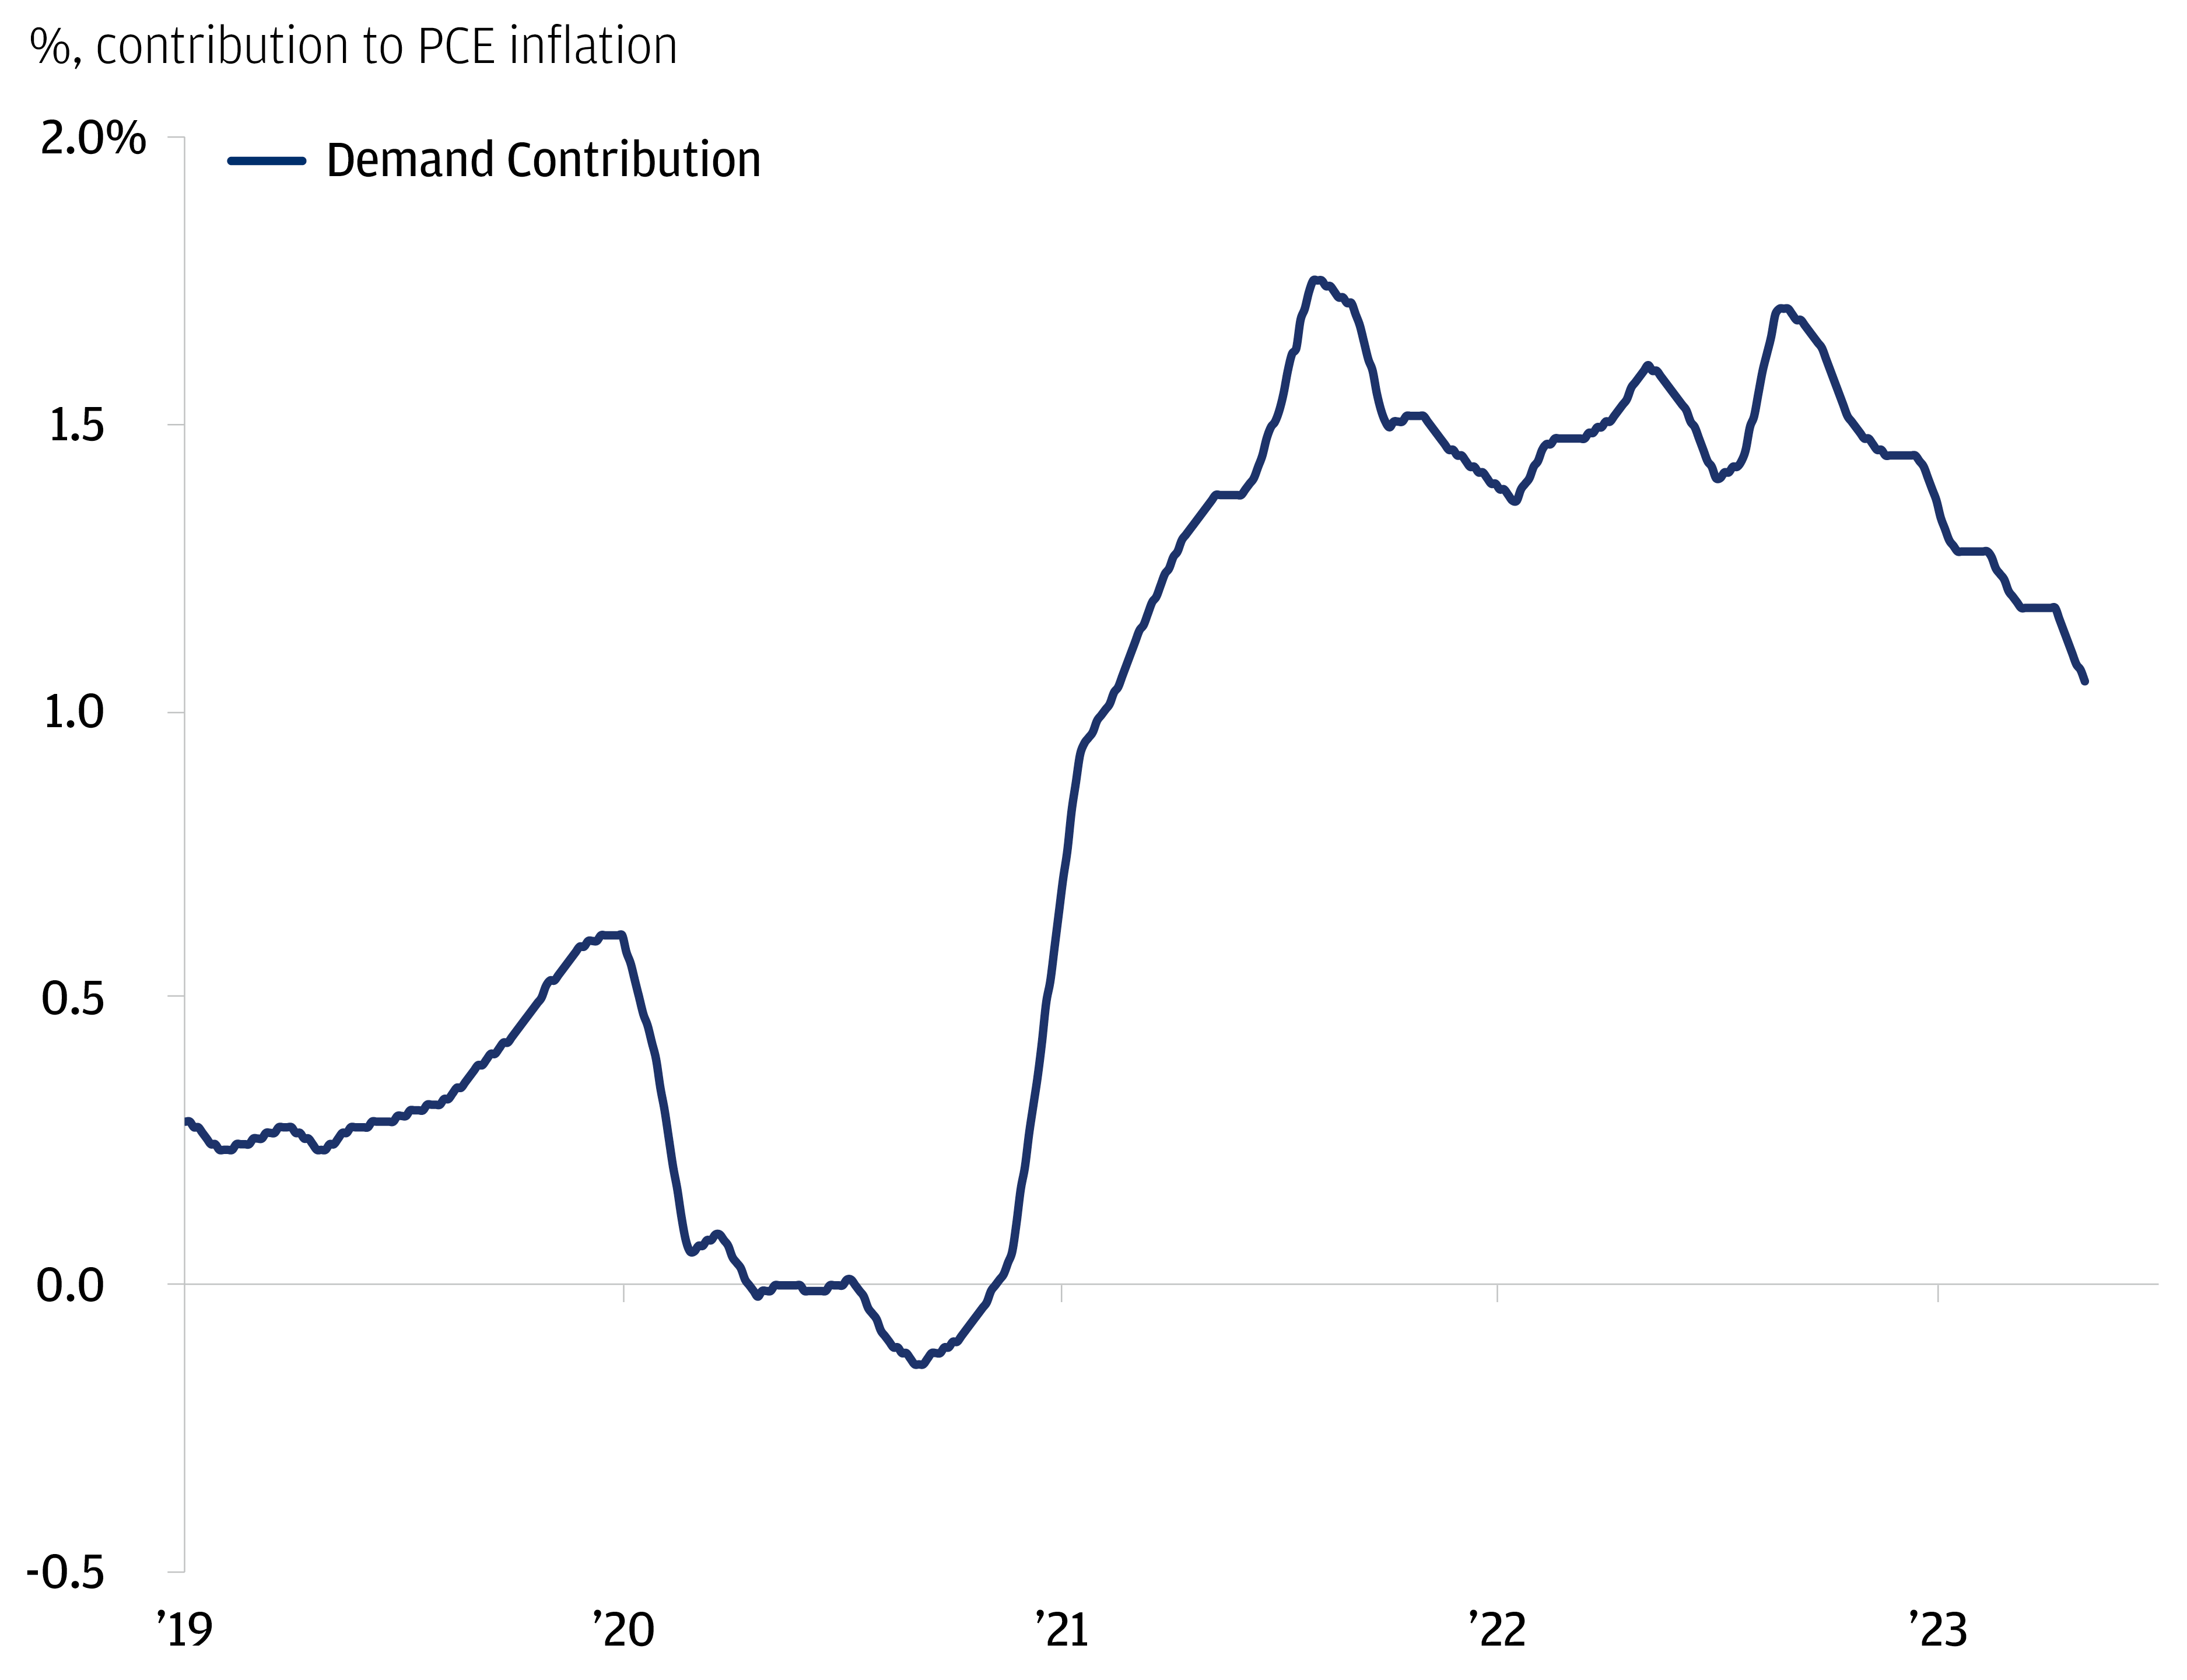 The chart describes demand and supply's % contribution to PCE inflation.